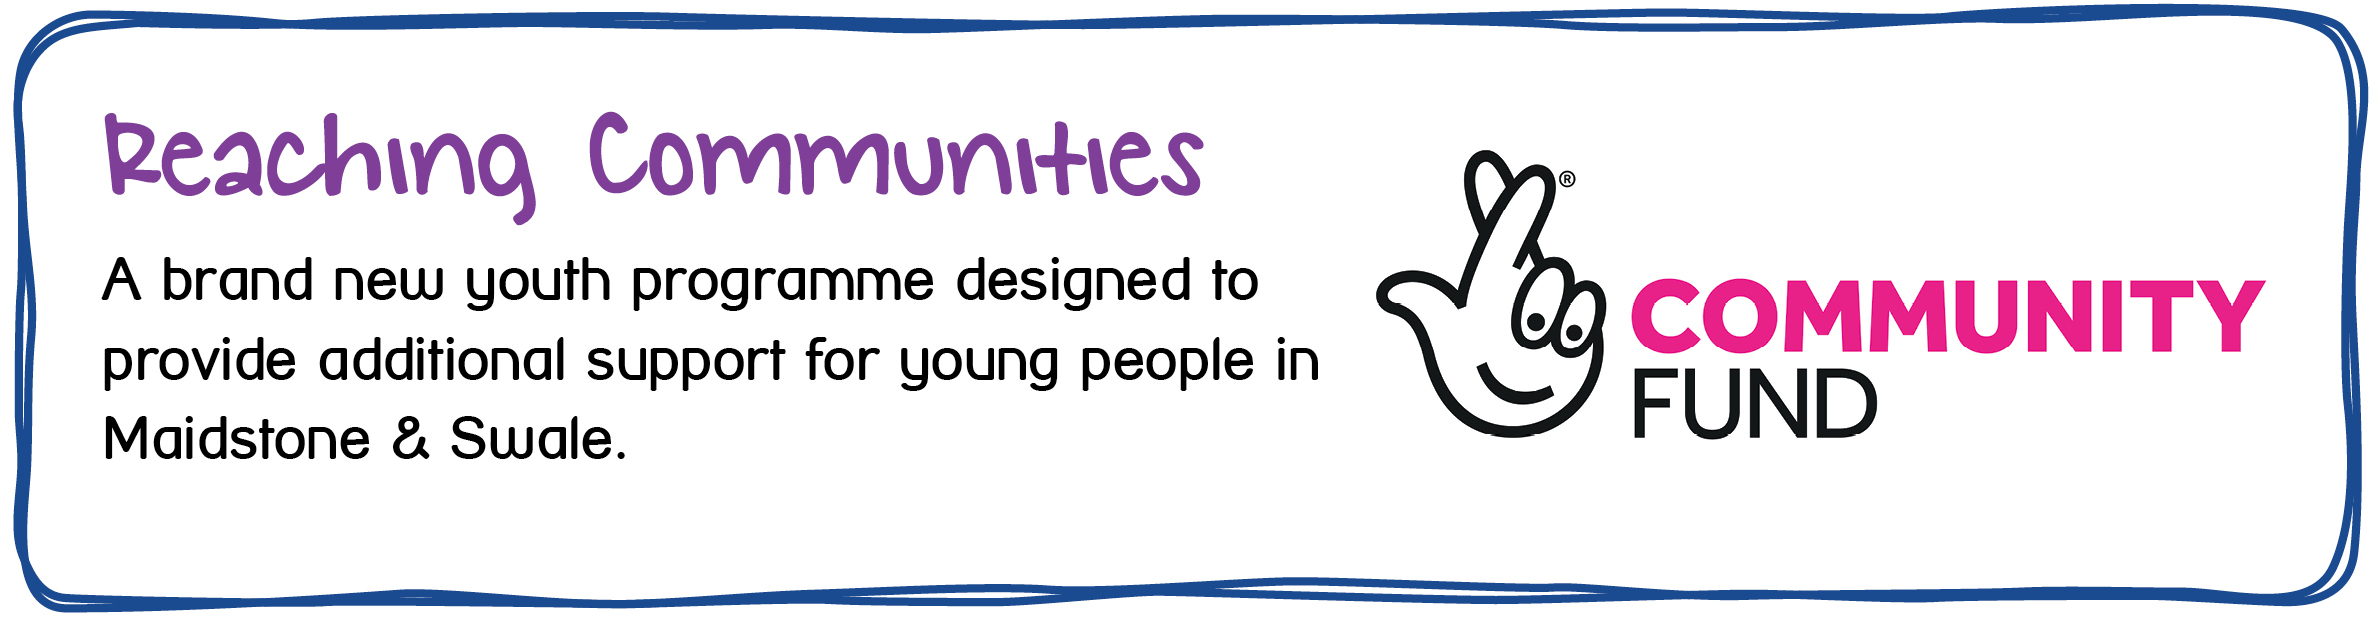 Reaching Communities - Youth Support In Maidstone & Swale - A brand new youth programme designed to provide additional support for young people in Maidstone & Swale. 